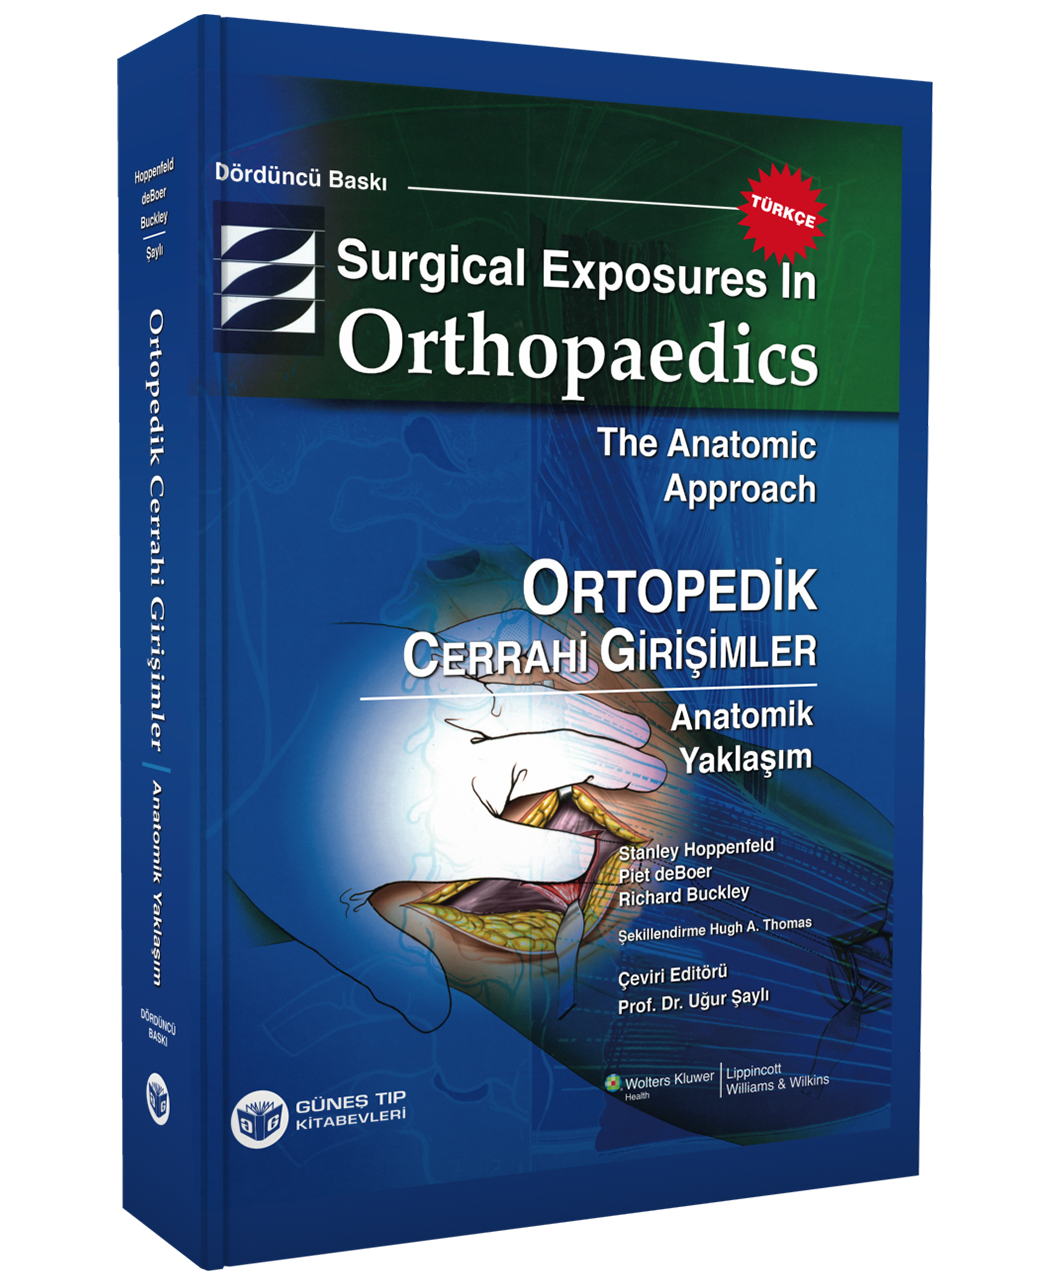 Surgical Exposures in Orthopaedics The Anatomic Approach, Türkçe